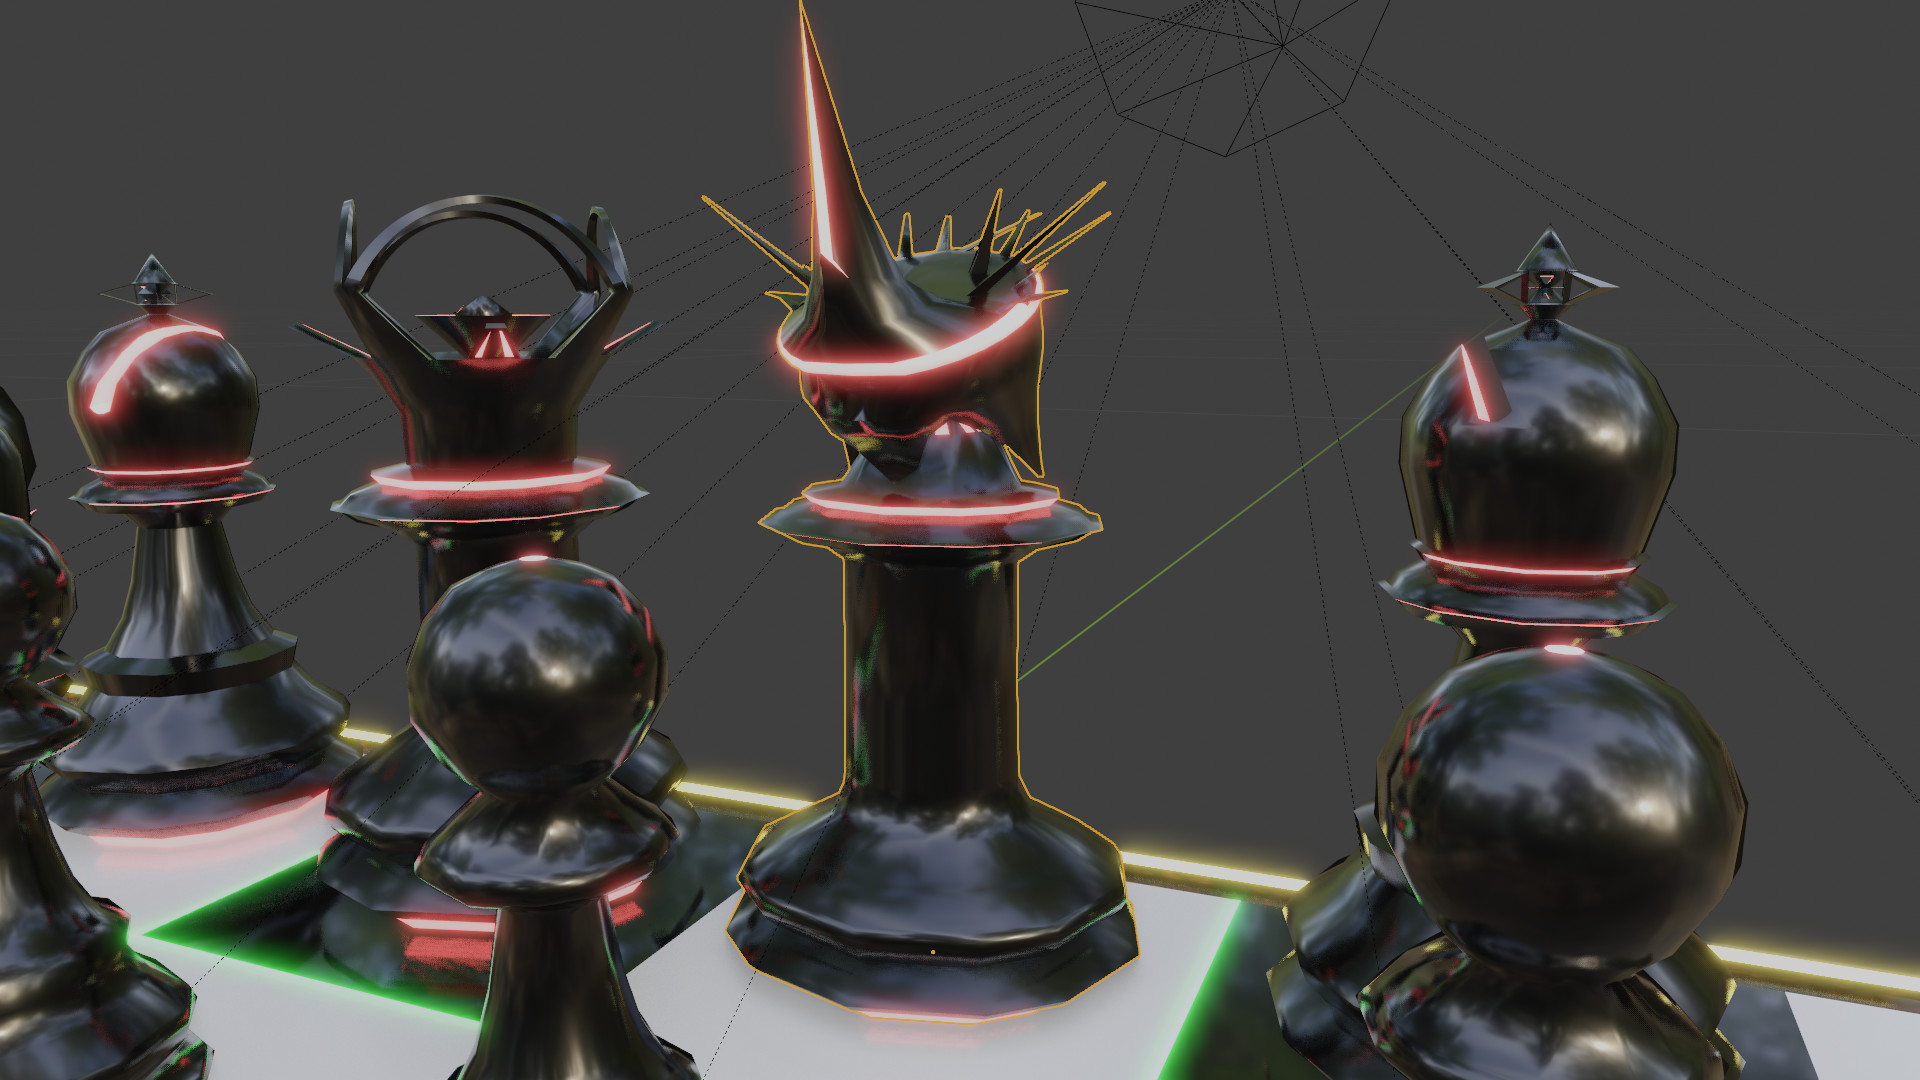 Drawing of chess pieces - Talk - GameDev.tv